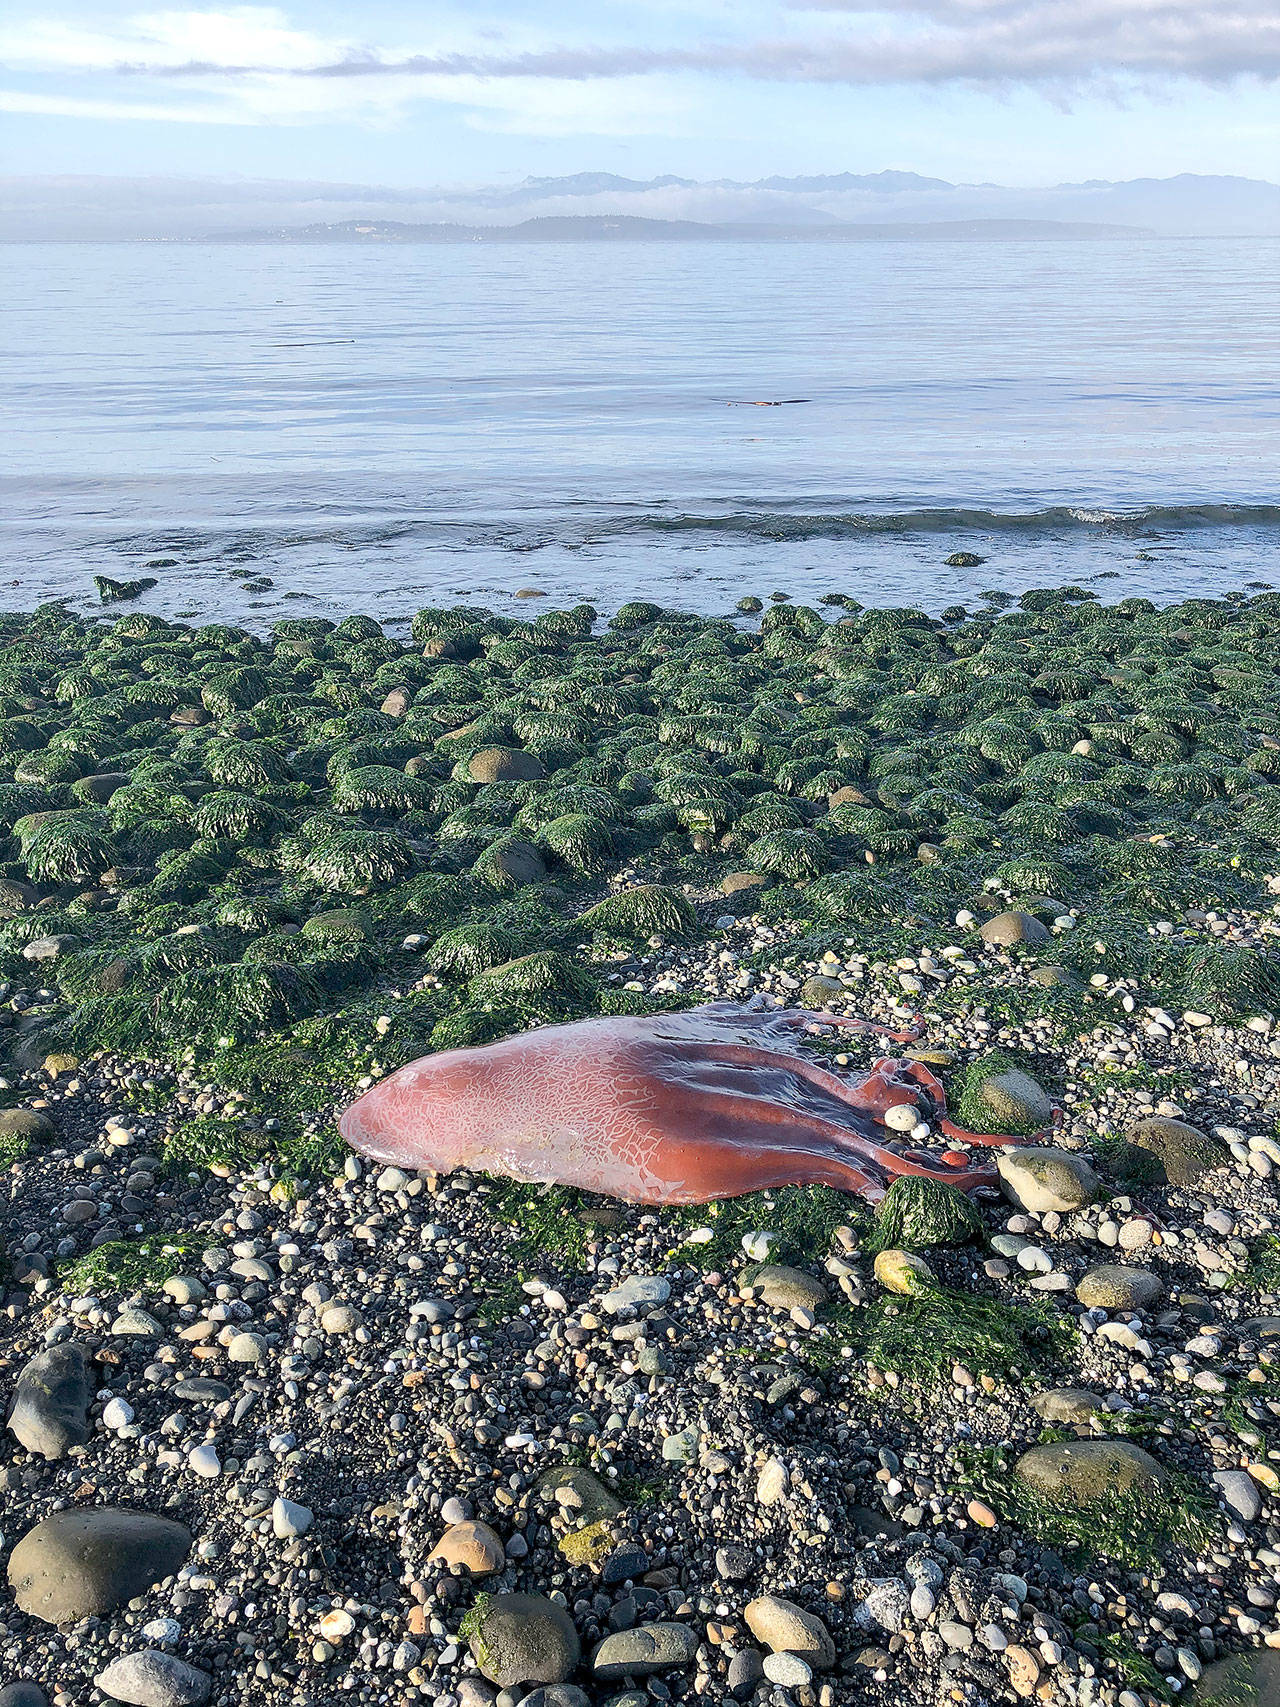 A sea creature found on the beach at Ebey’s Landing may be a Haliphron atlanticus, or seven-armed octopus, scientists have theorized. Photo by Ron Newberry.